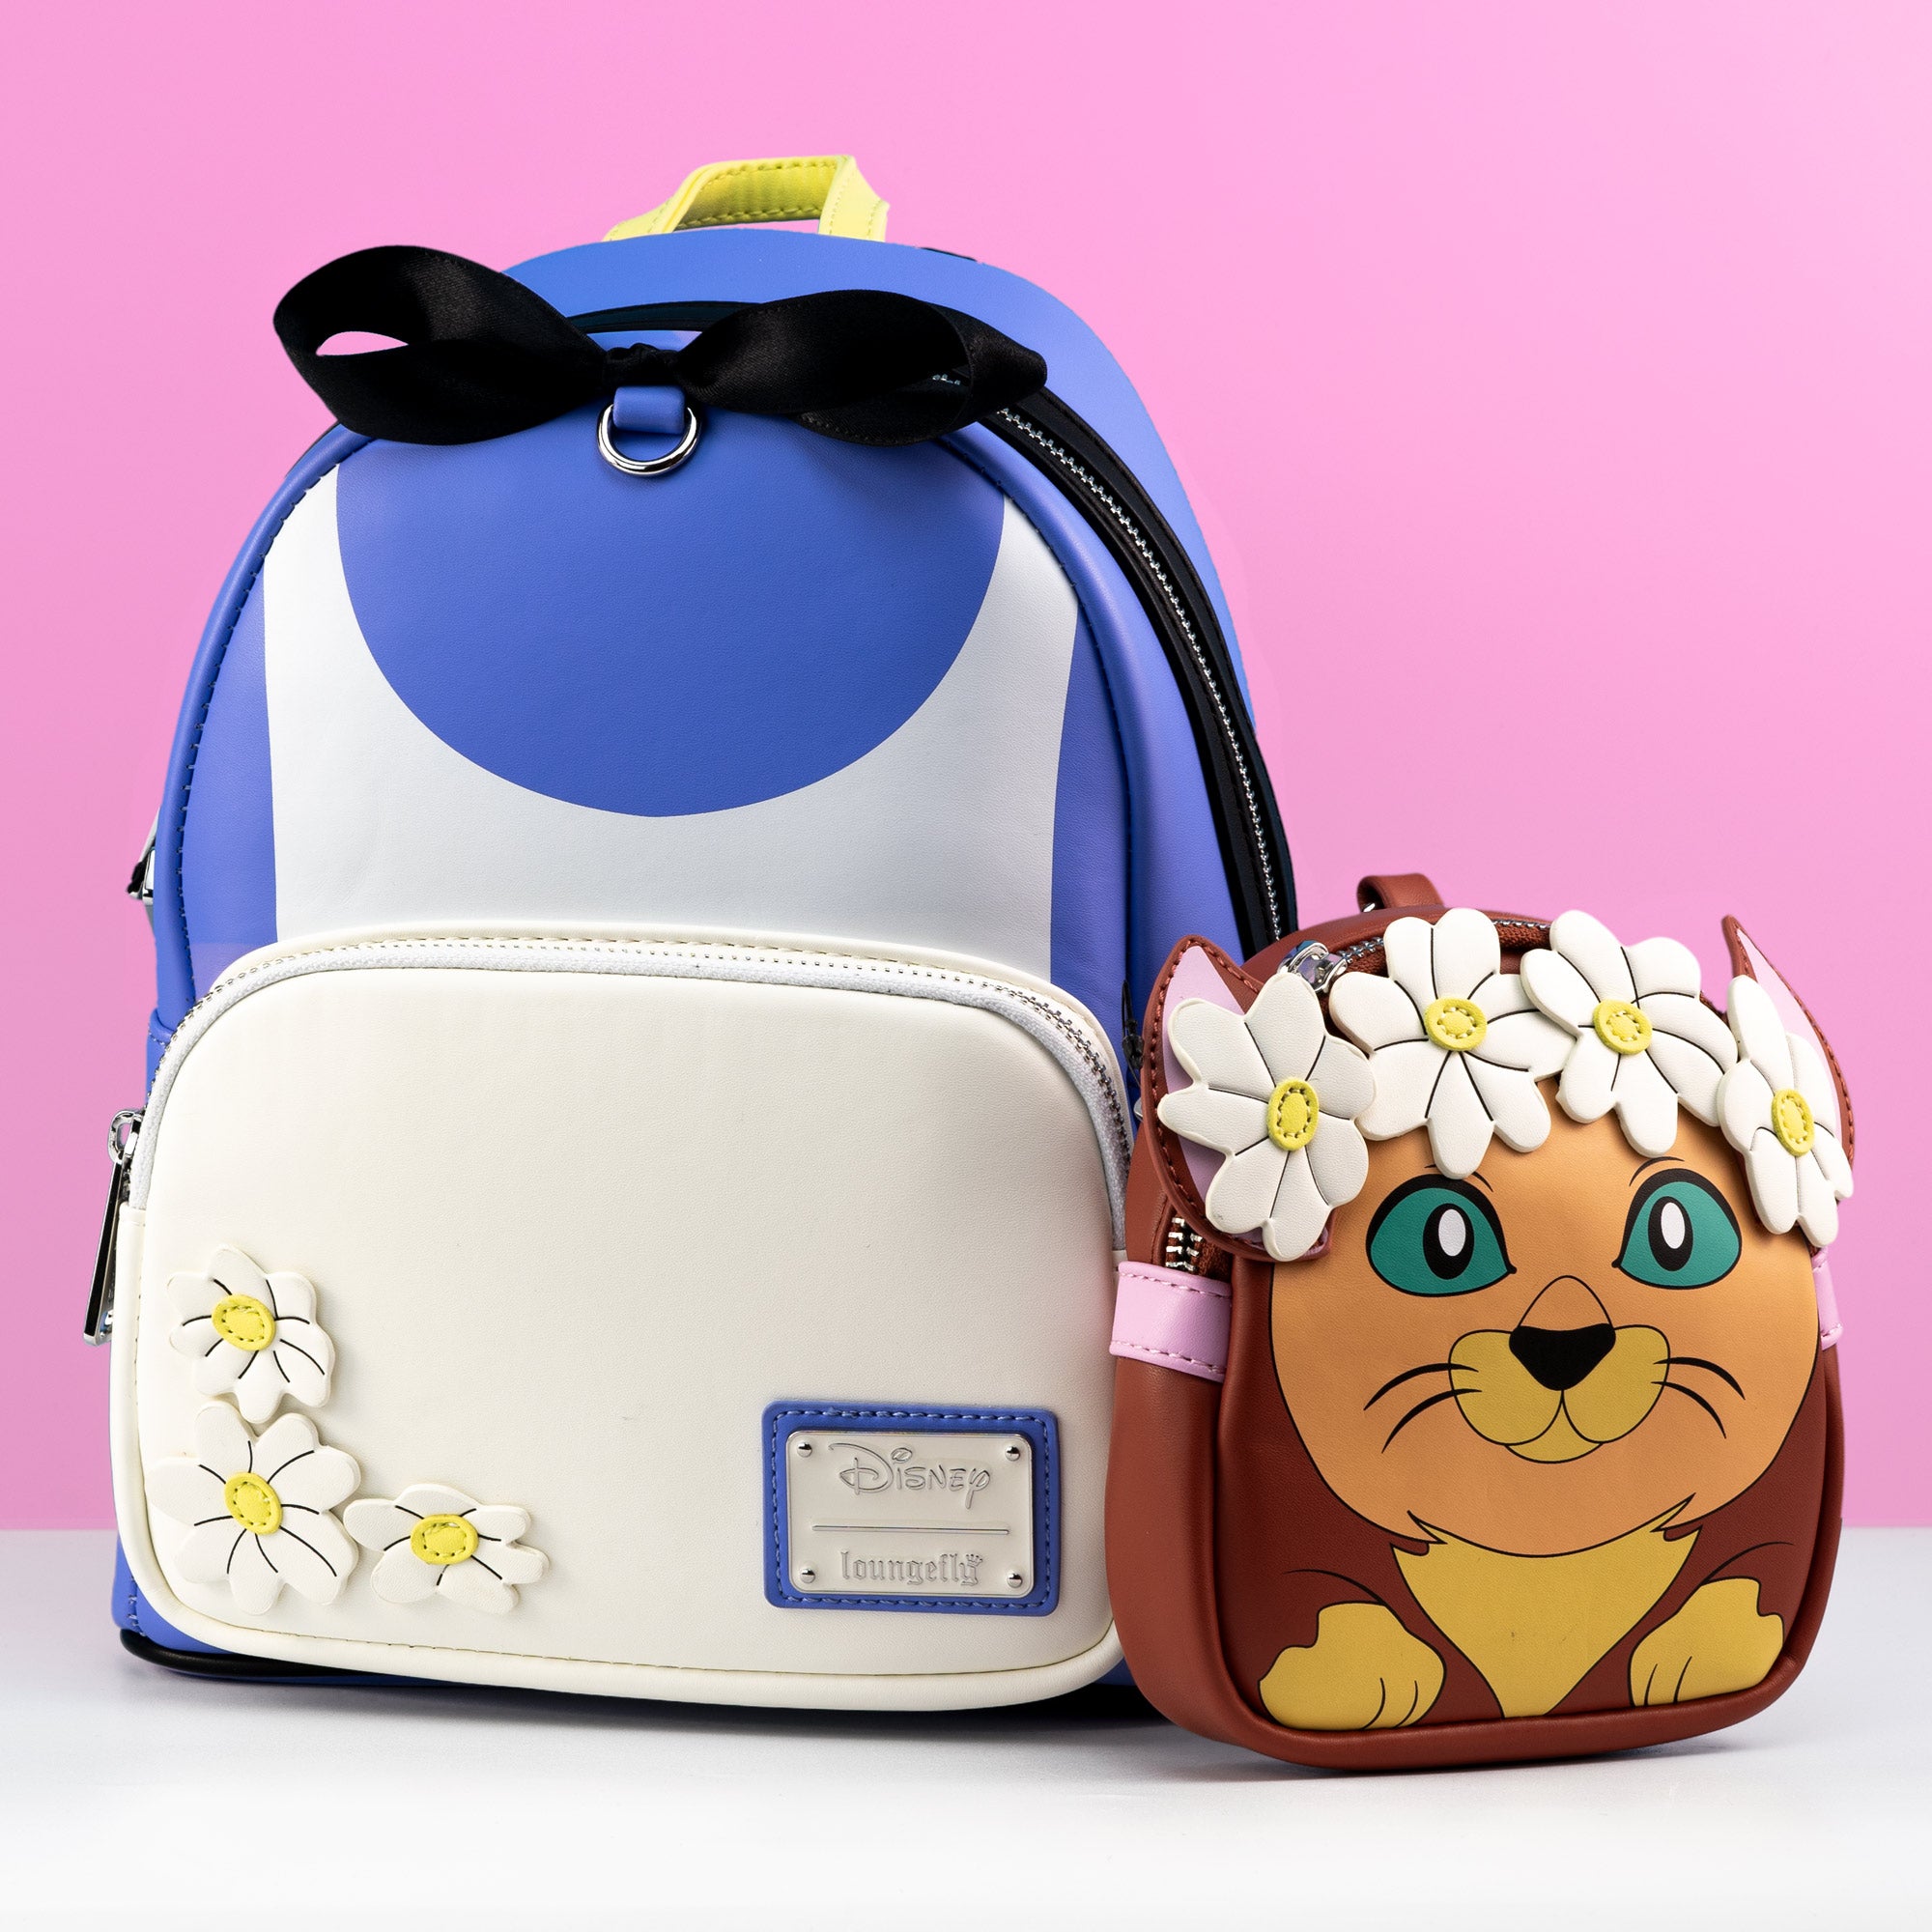 Loungefly x Disney Alice in Wonderland Mini Backpack with Detachable Wristlet